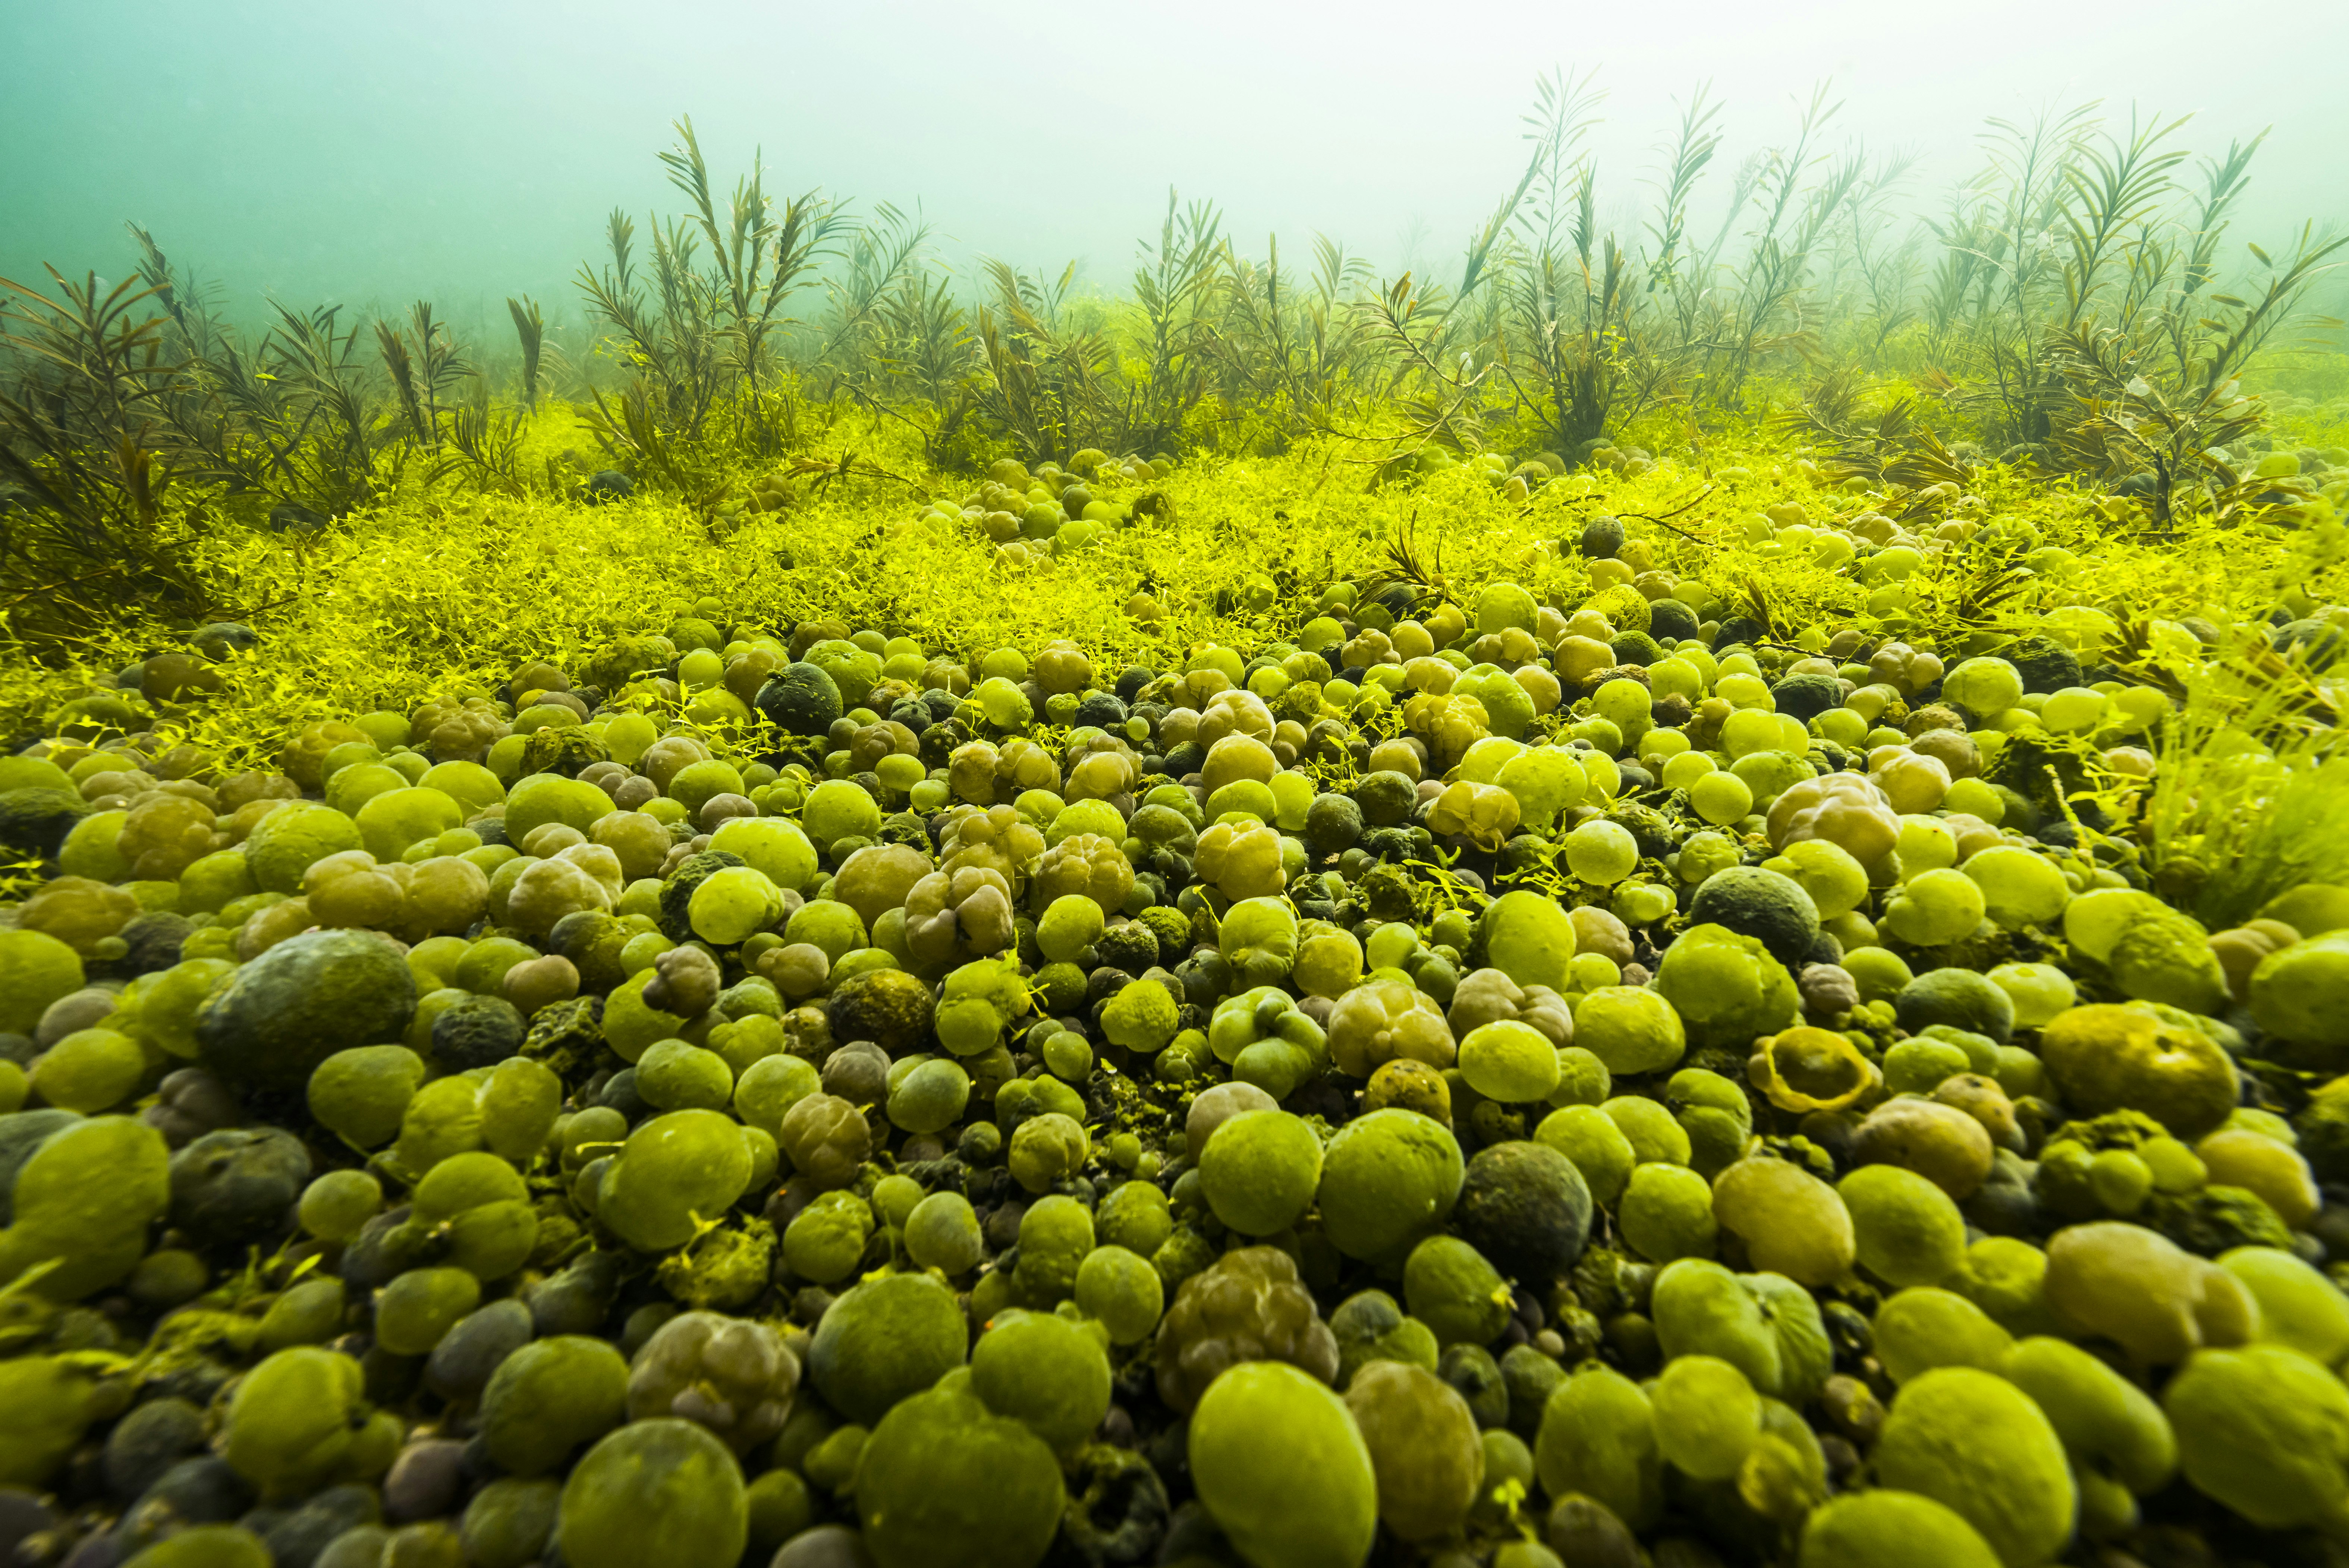 The light filtering through the waters of Yellowstone lake forms a gradient from white to deep teal, illuminating greenish brown fronds of aquatic plants and bright yellow and chartreuse spheres, which are Nostoc cyanobacteria that can grow to the size of walnuts.